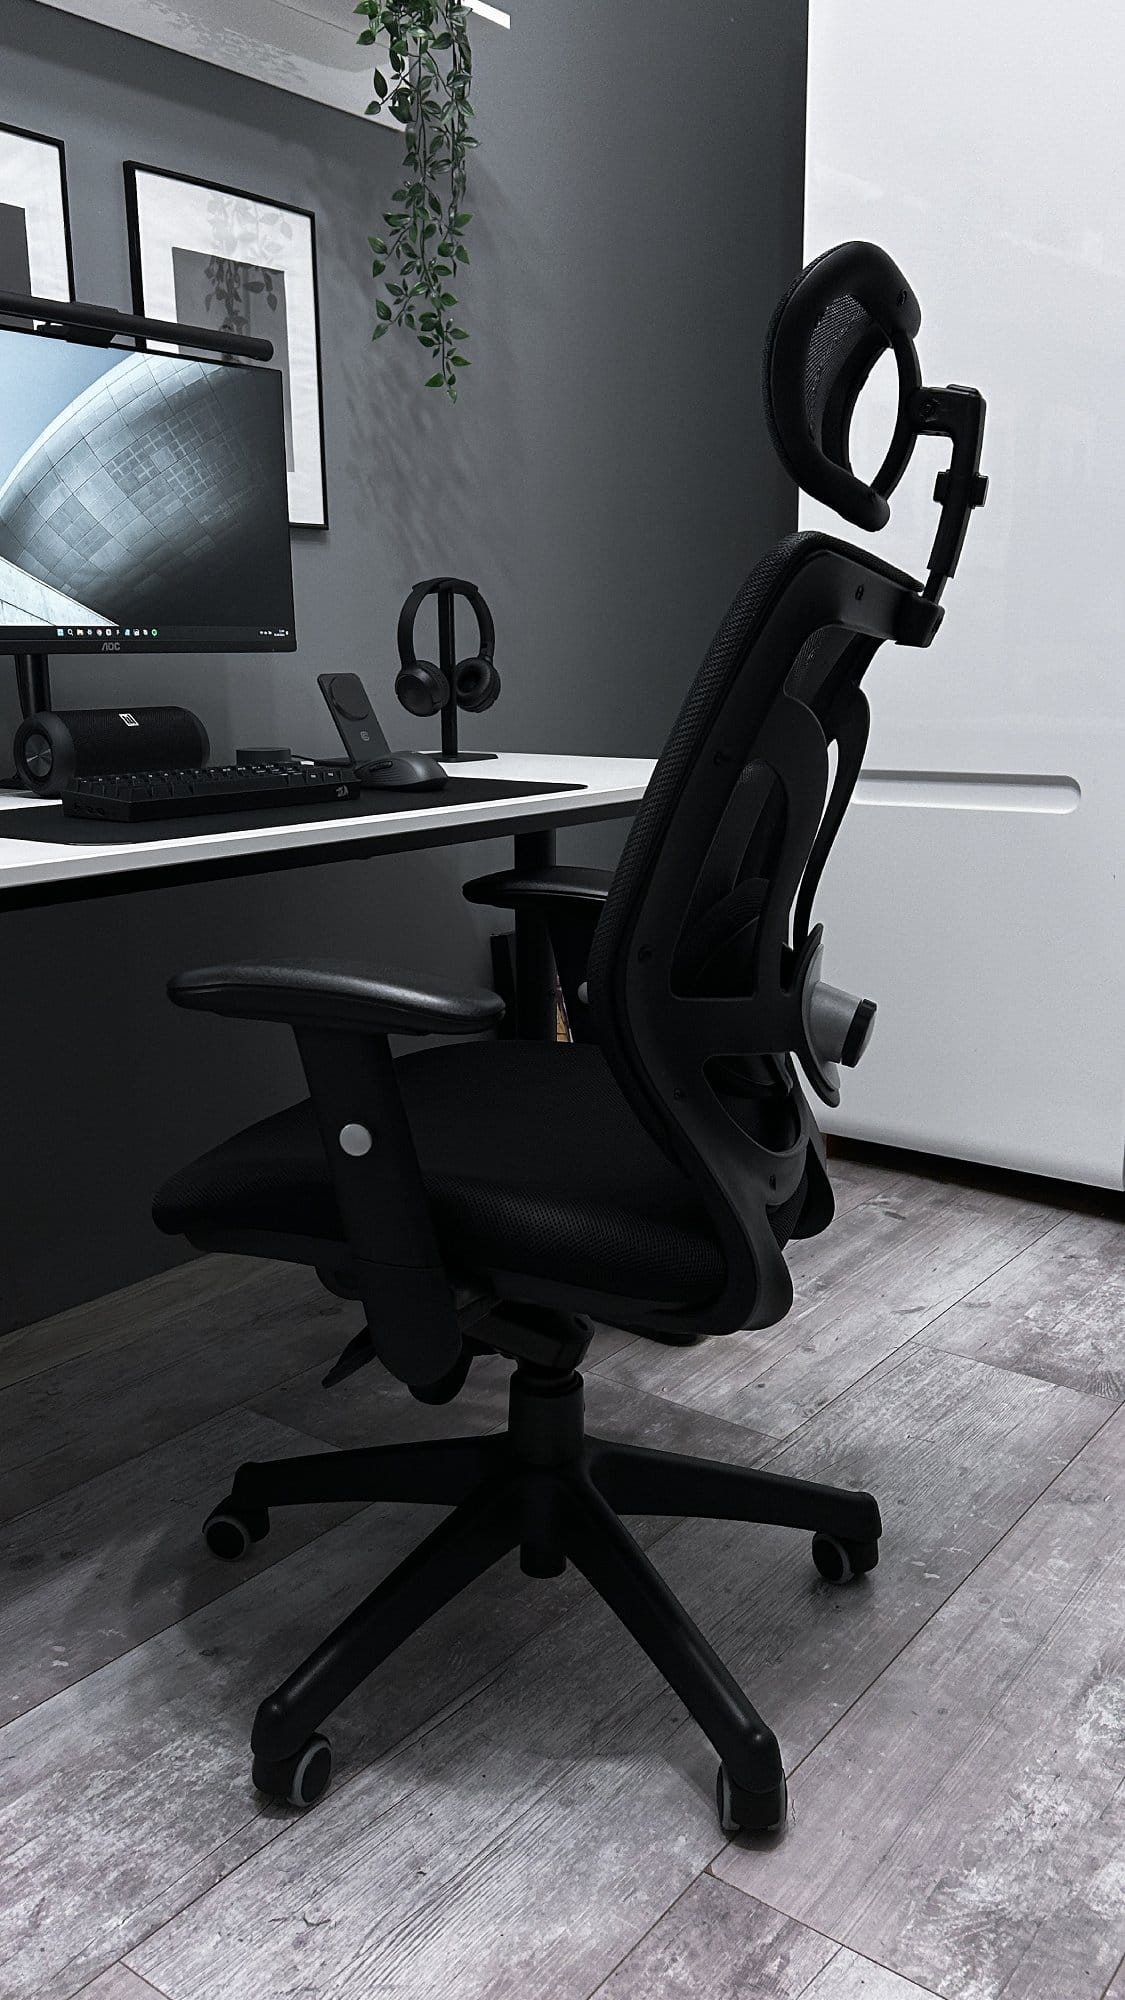 A black ergonomic office chair in the foreground with a modern desk and computer setup in the background